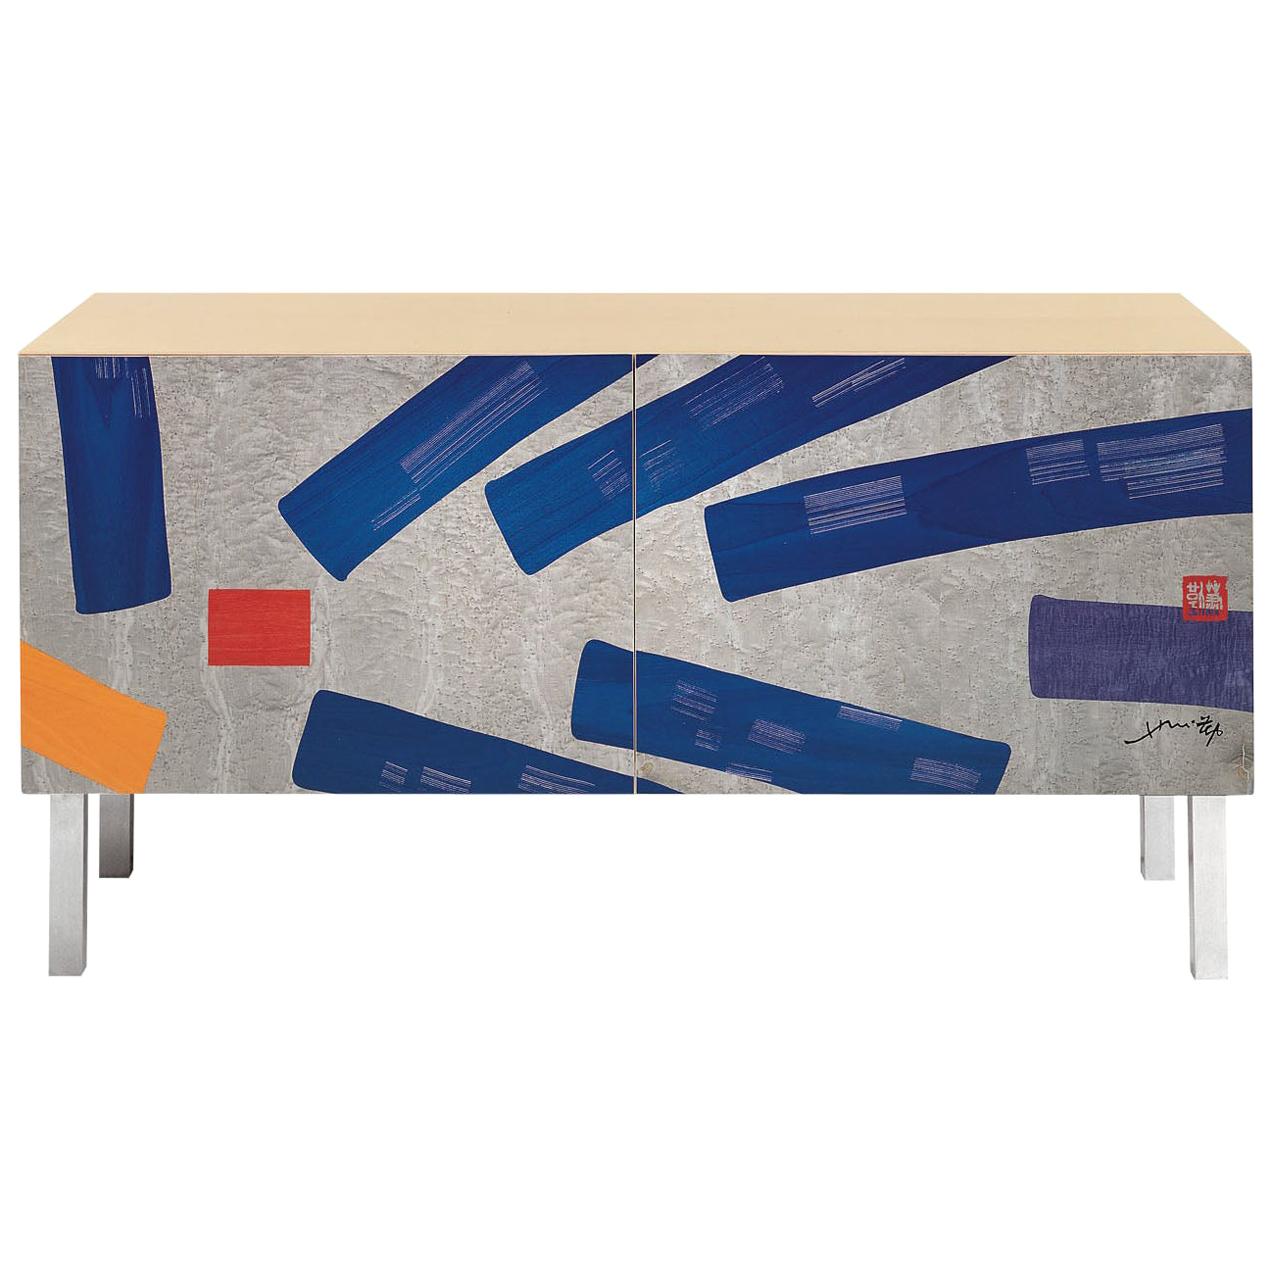 Intarsia Sideboard by Hsiao Chin